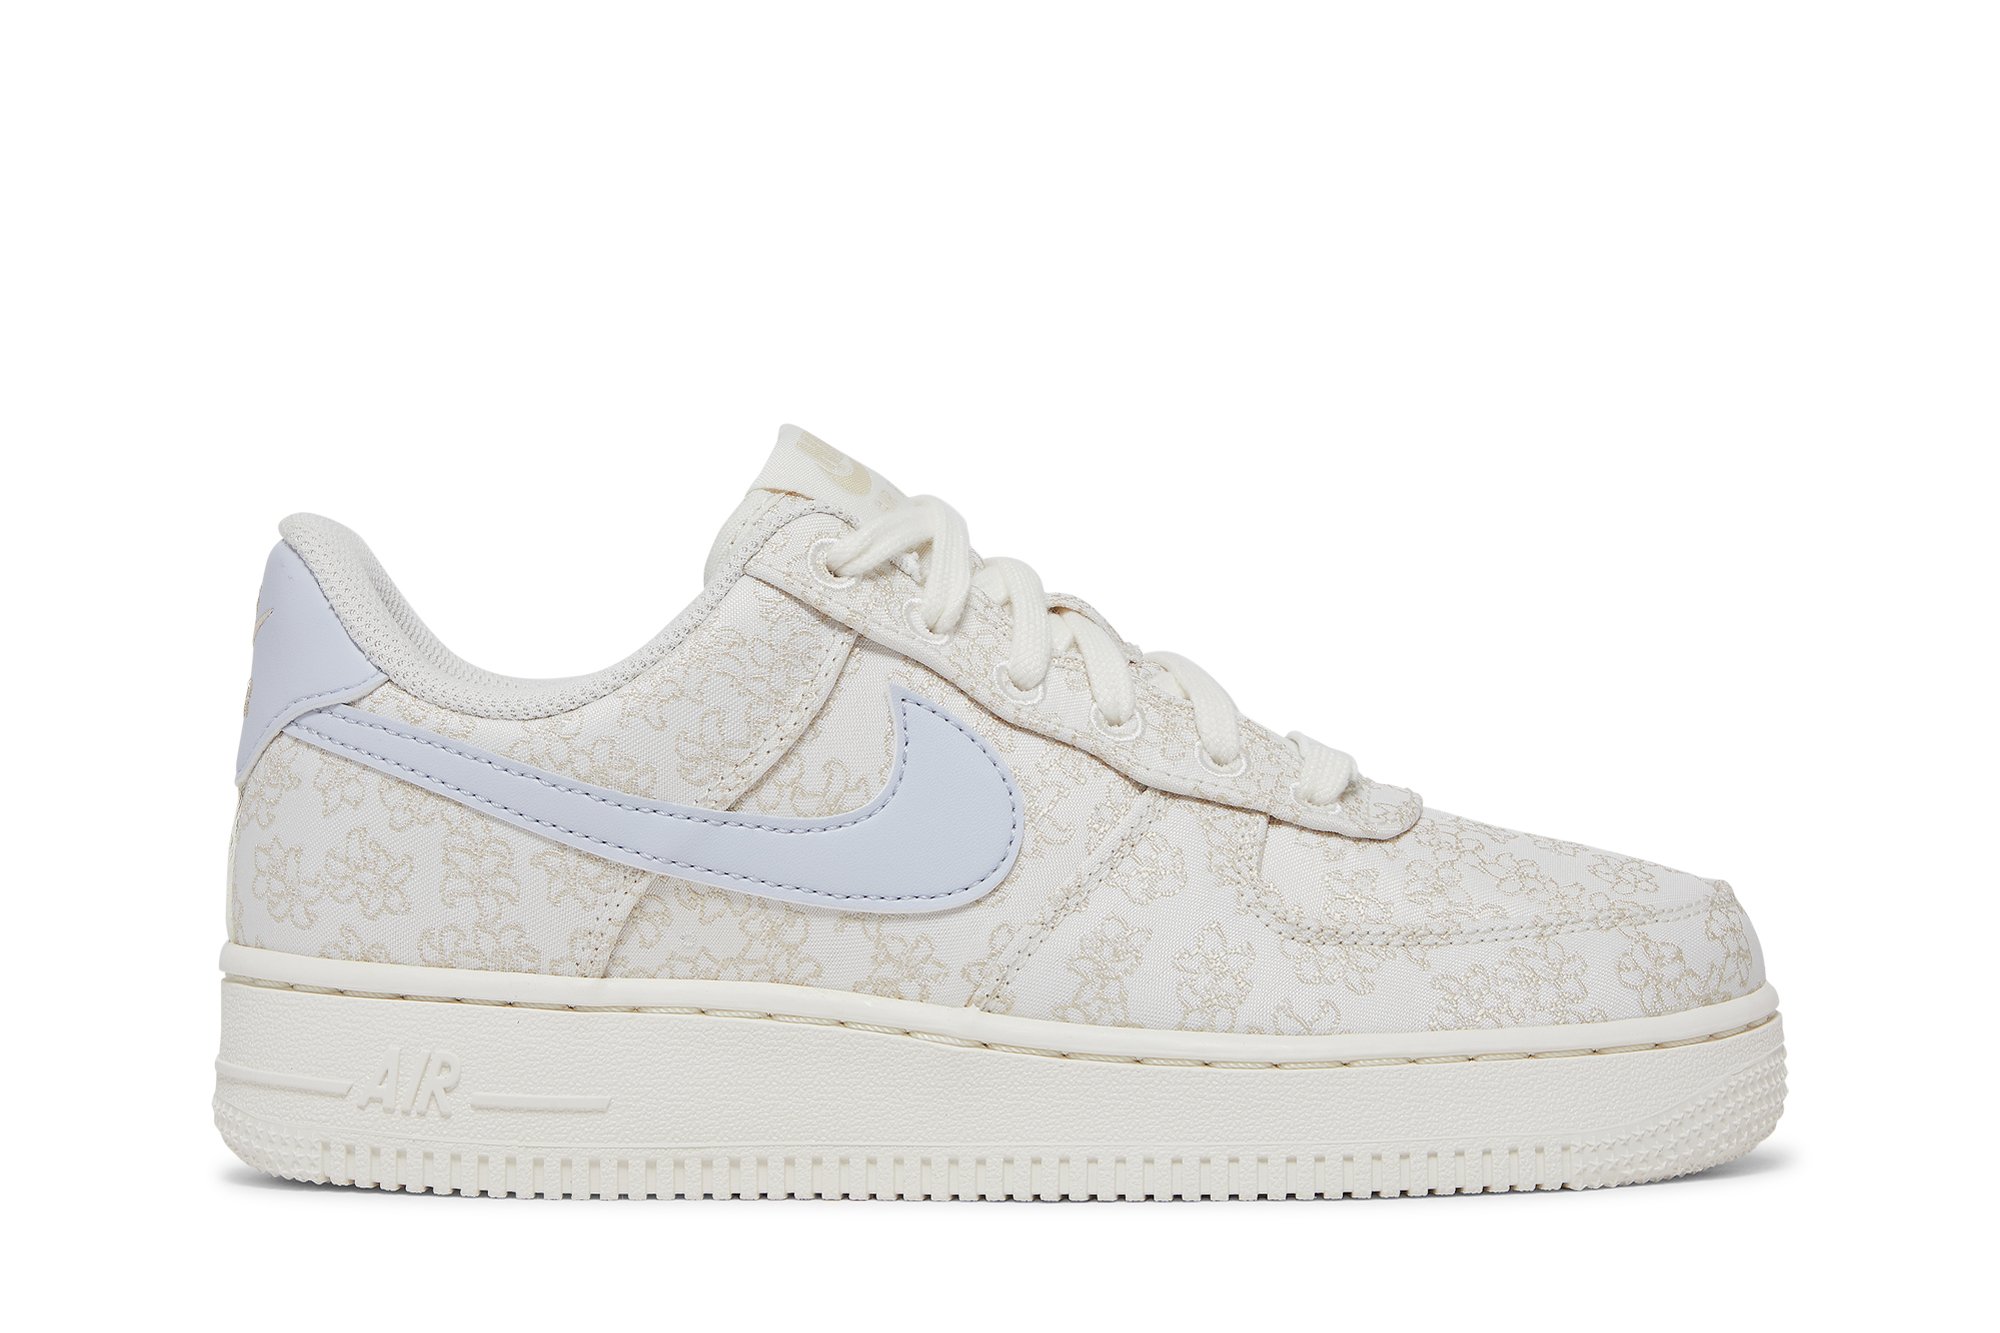 Buy Wmns Air Force 1 '07 SE Jacquard 'Floral Embroidery' - DR6402 900 | GOAT